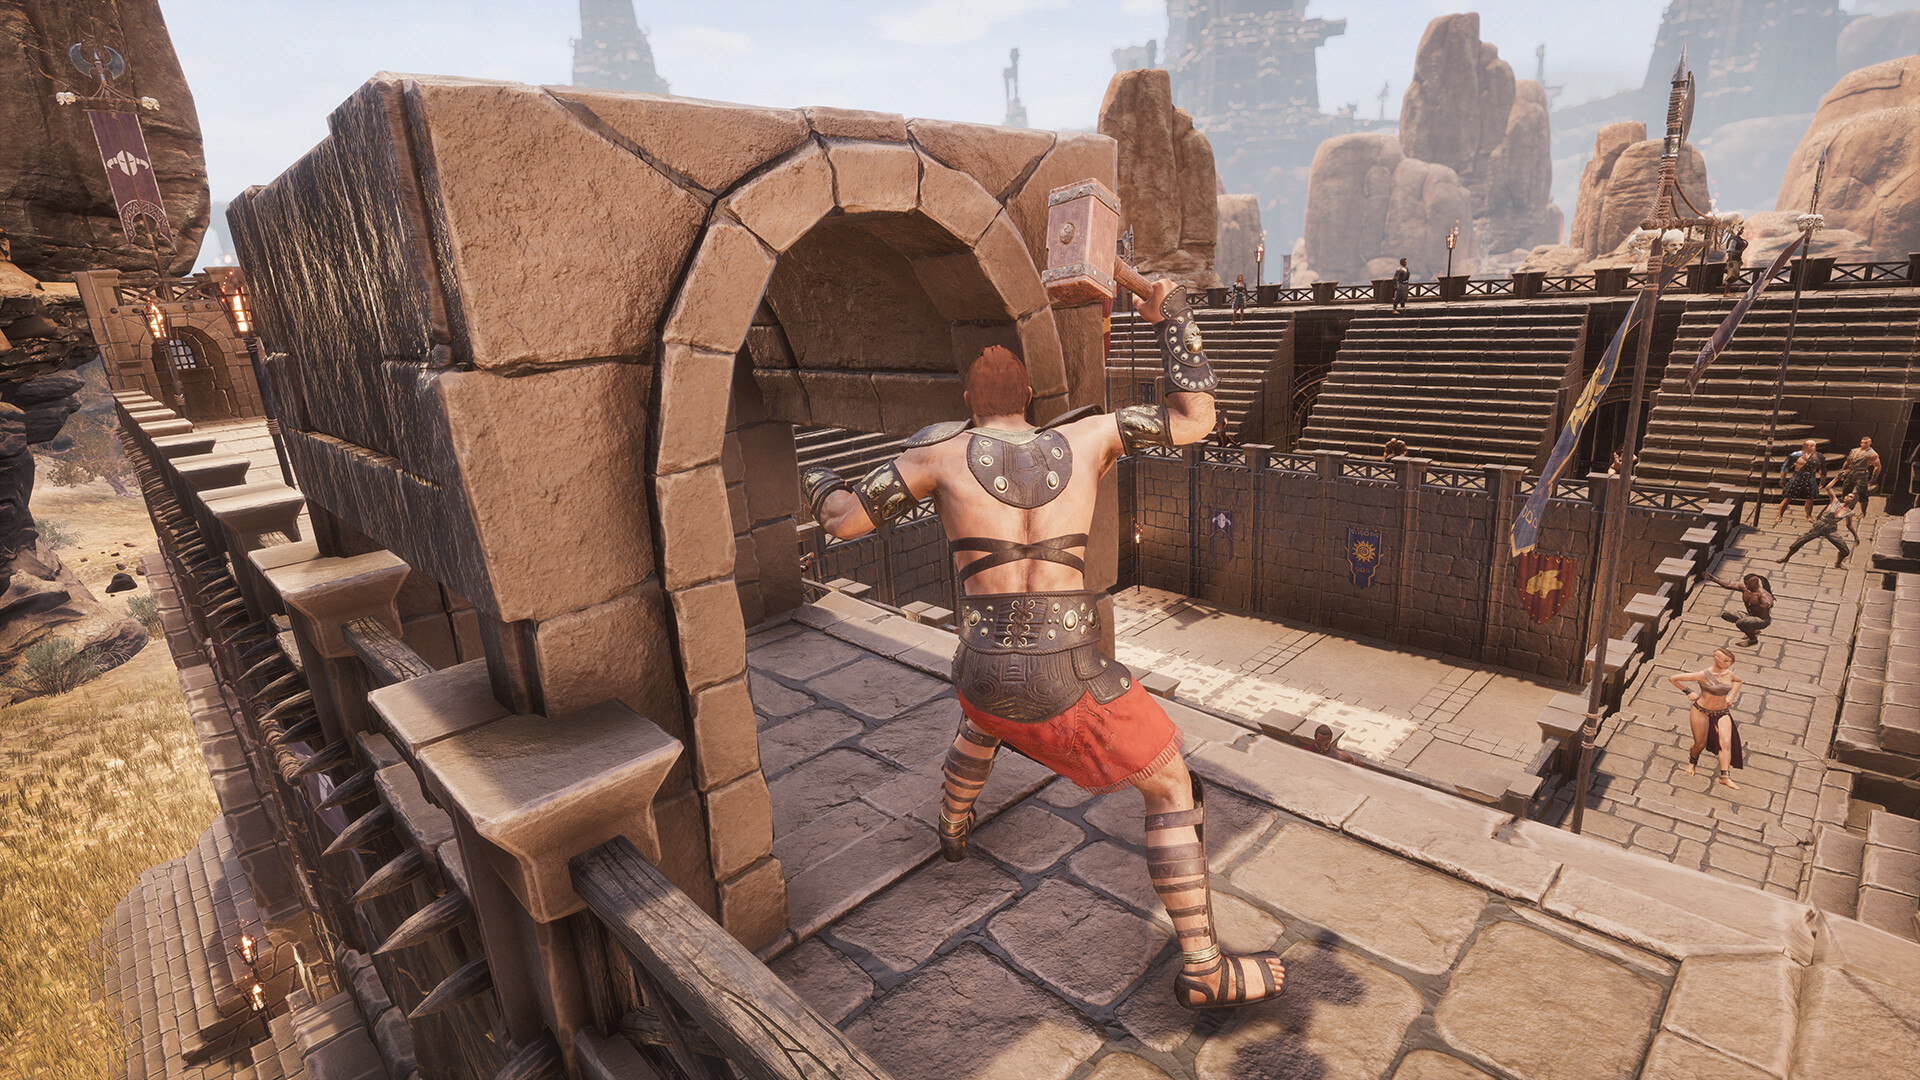 Pc Update 06 01 2021 Update 2 2 Conan Exiles Update For 6 January 2021 Steamdb For conan exiles on the playstation 4, a gamefaqs message board topic titled respawn rate is makes this game unplayable.. steam database